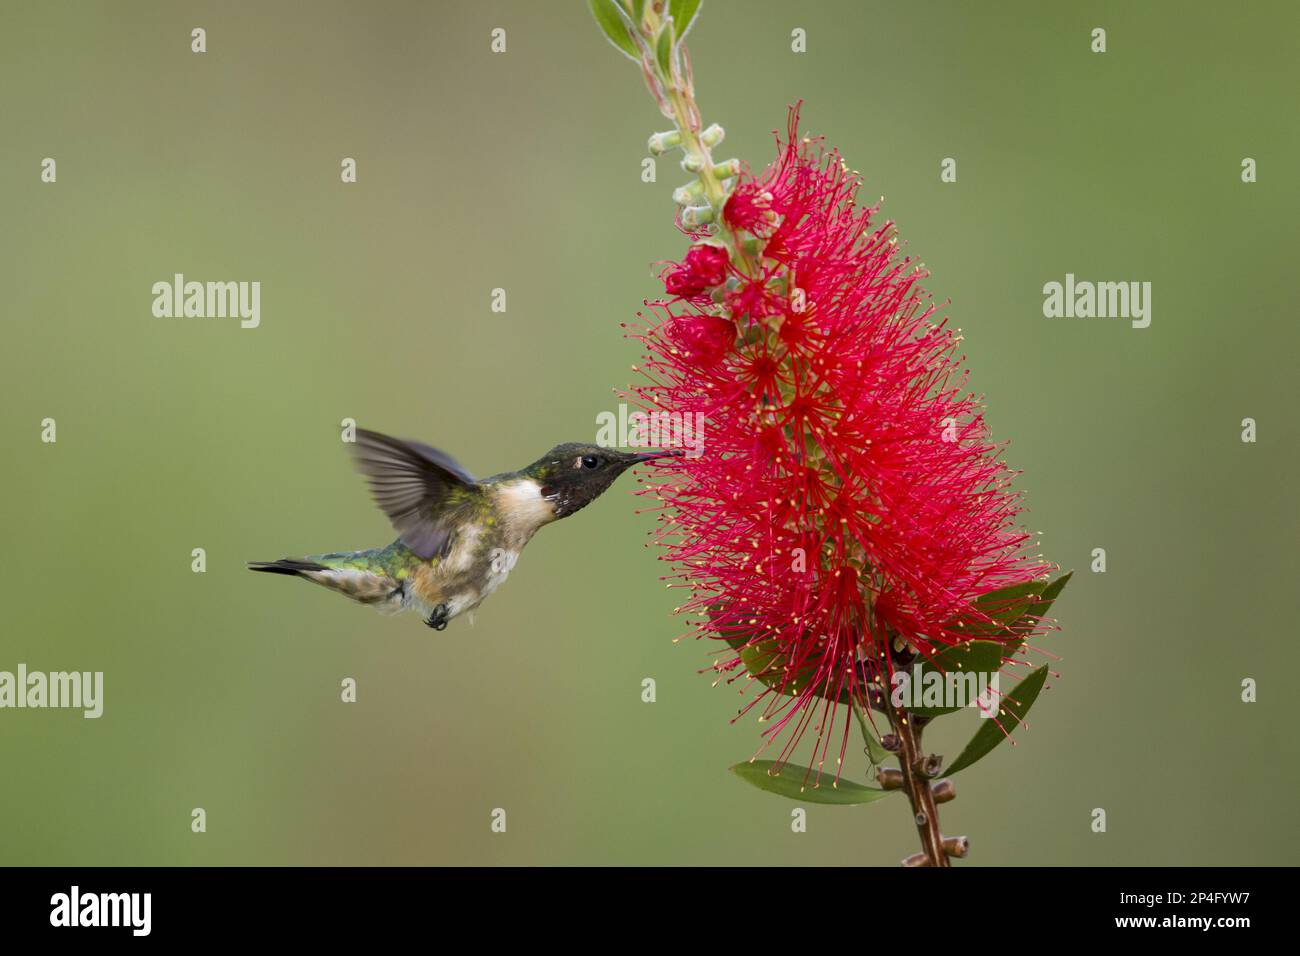 Ruby-throated hummingbird (Archilochus colubris) adult male, hovering, eats bottlebrush (Callistemon sp.) introduced species at flowering time, Gulf Stock Photo